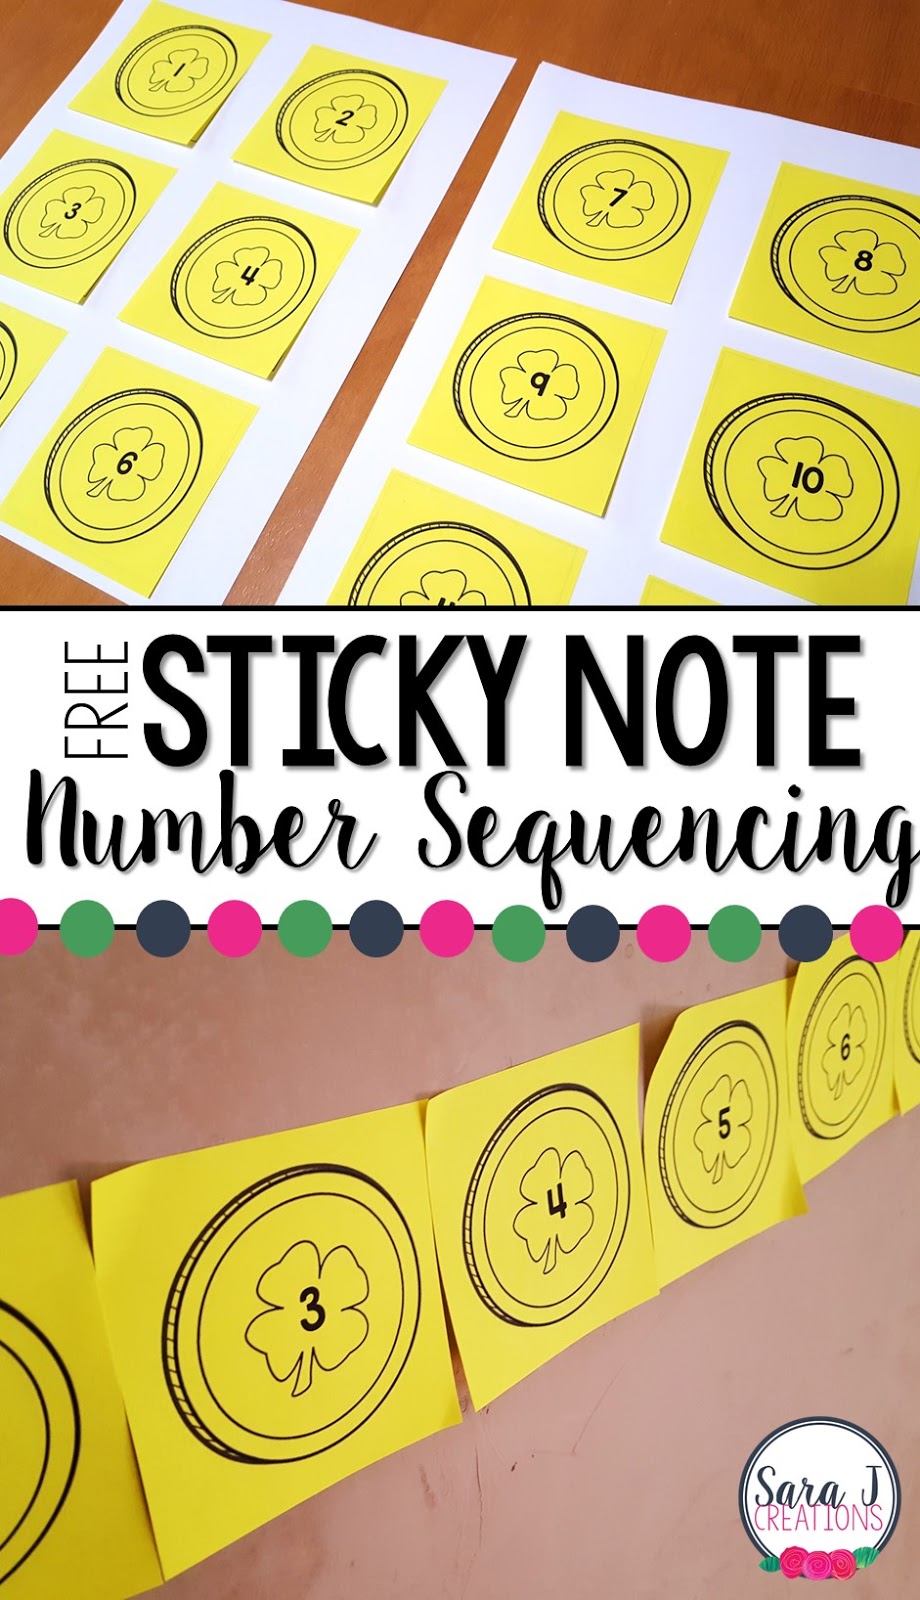 Sticky notes to practice number sequencing.  An easy, low prep activity to practice counting with a fun St. Patrick's Day coin theme.  FREE templates included.